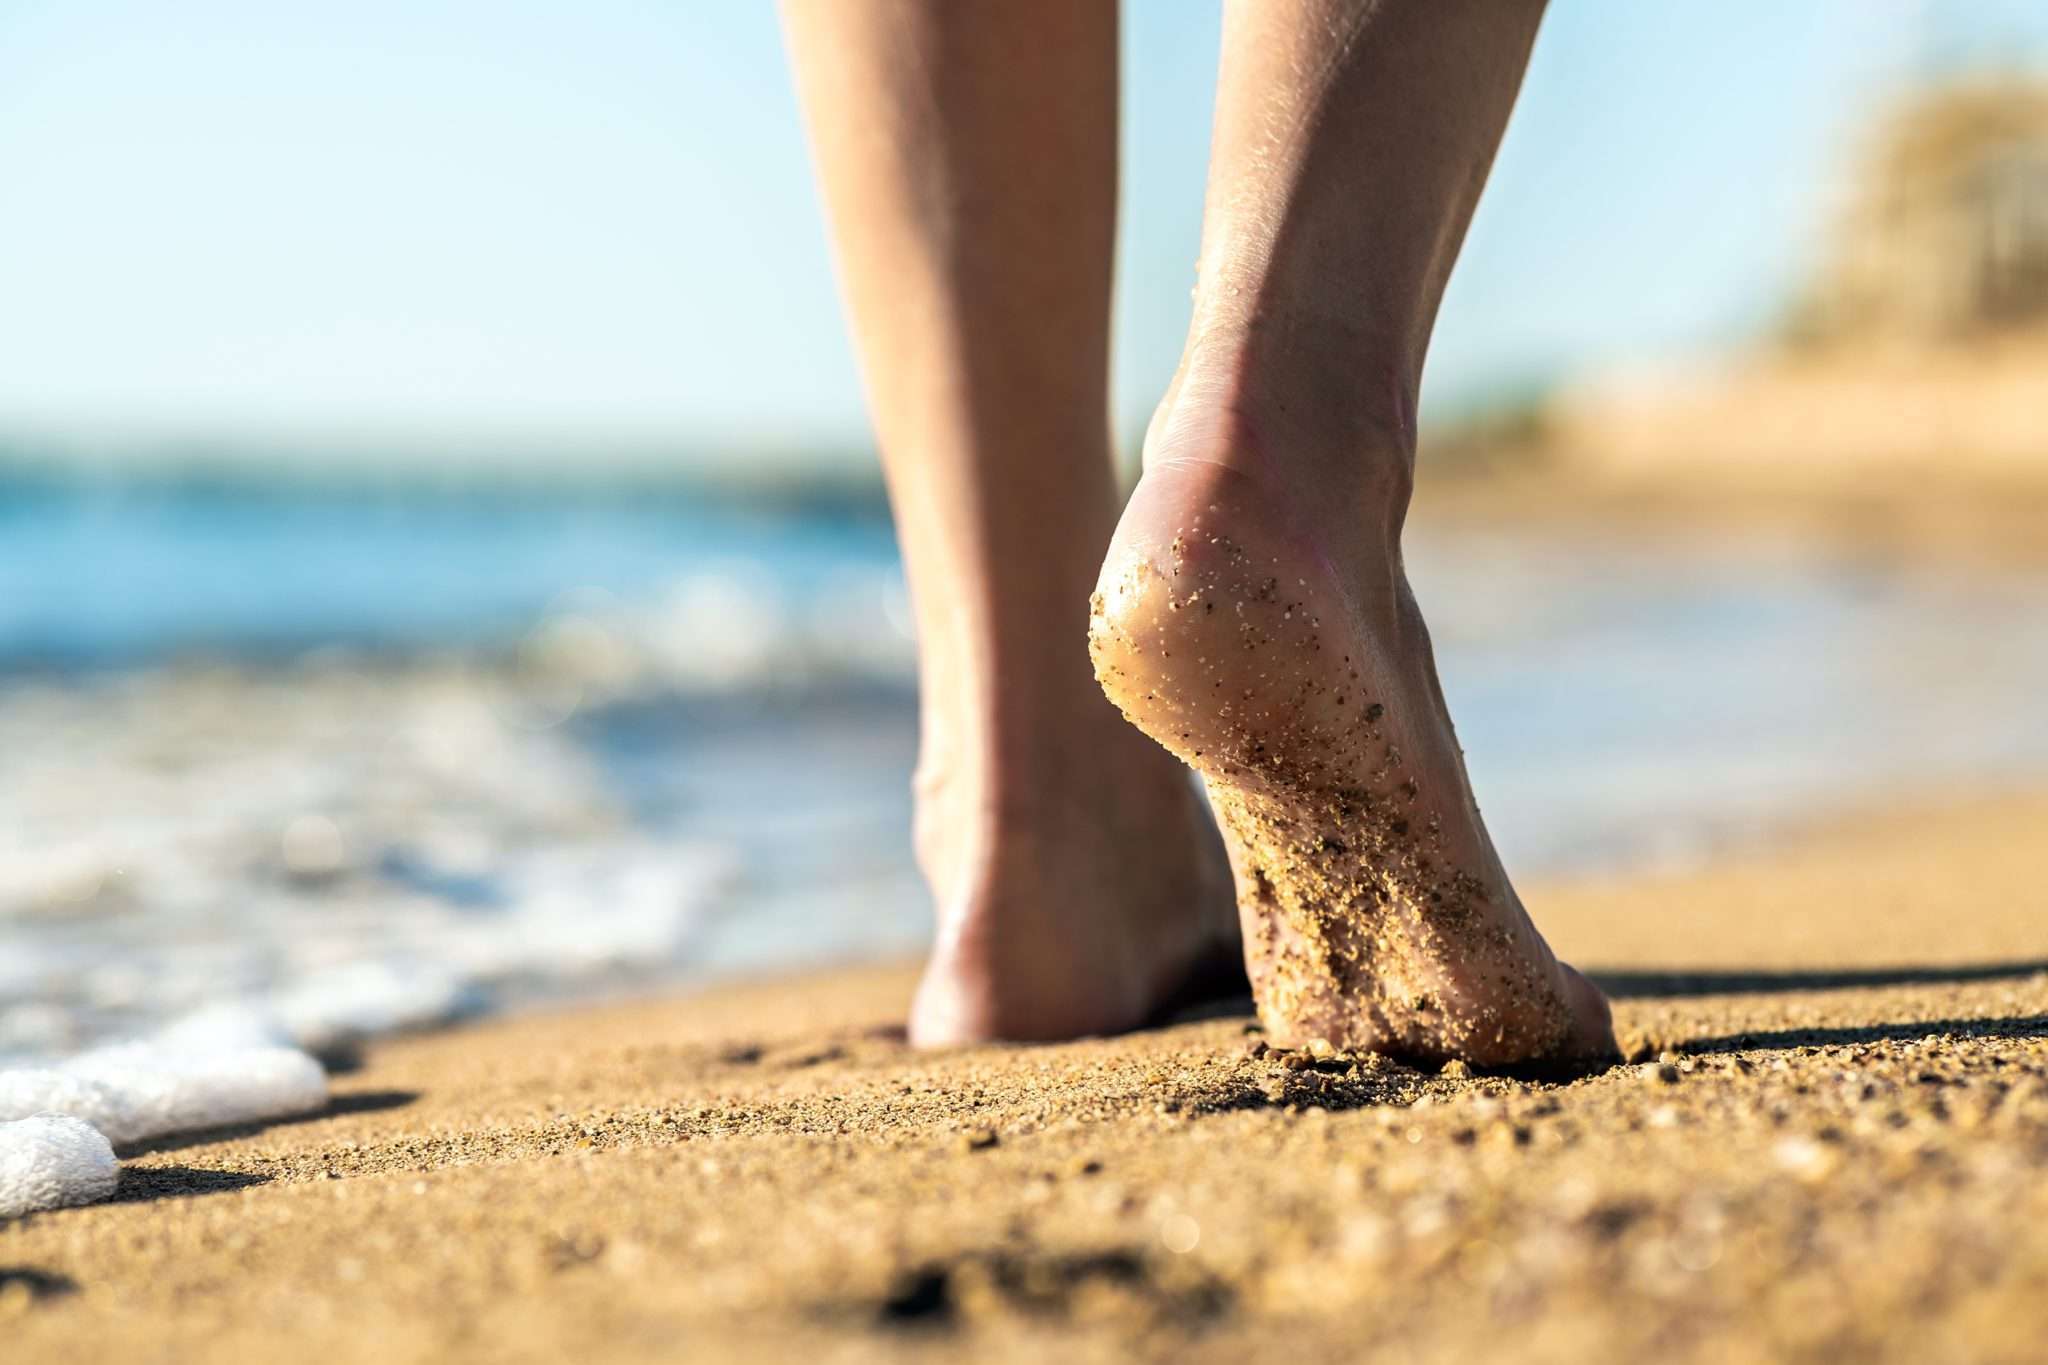 Can your feet cause knee pain?